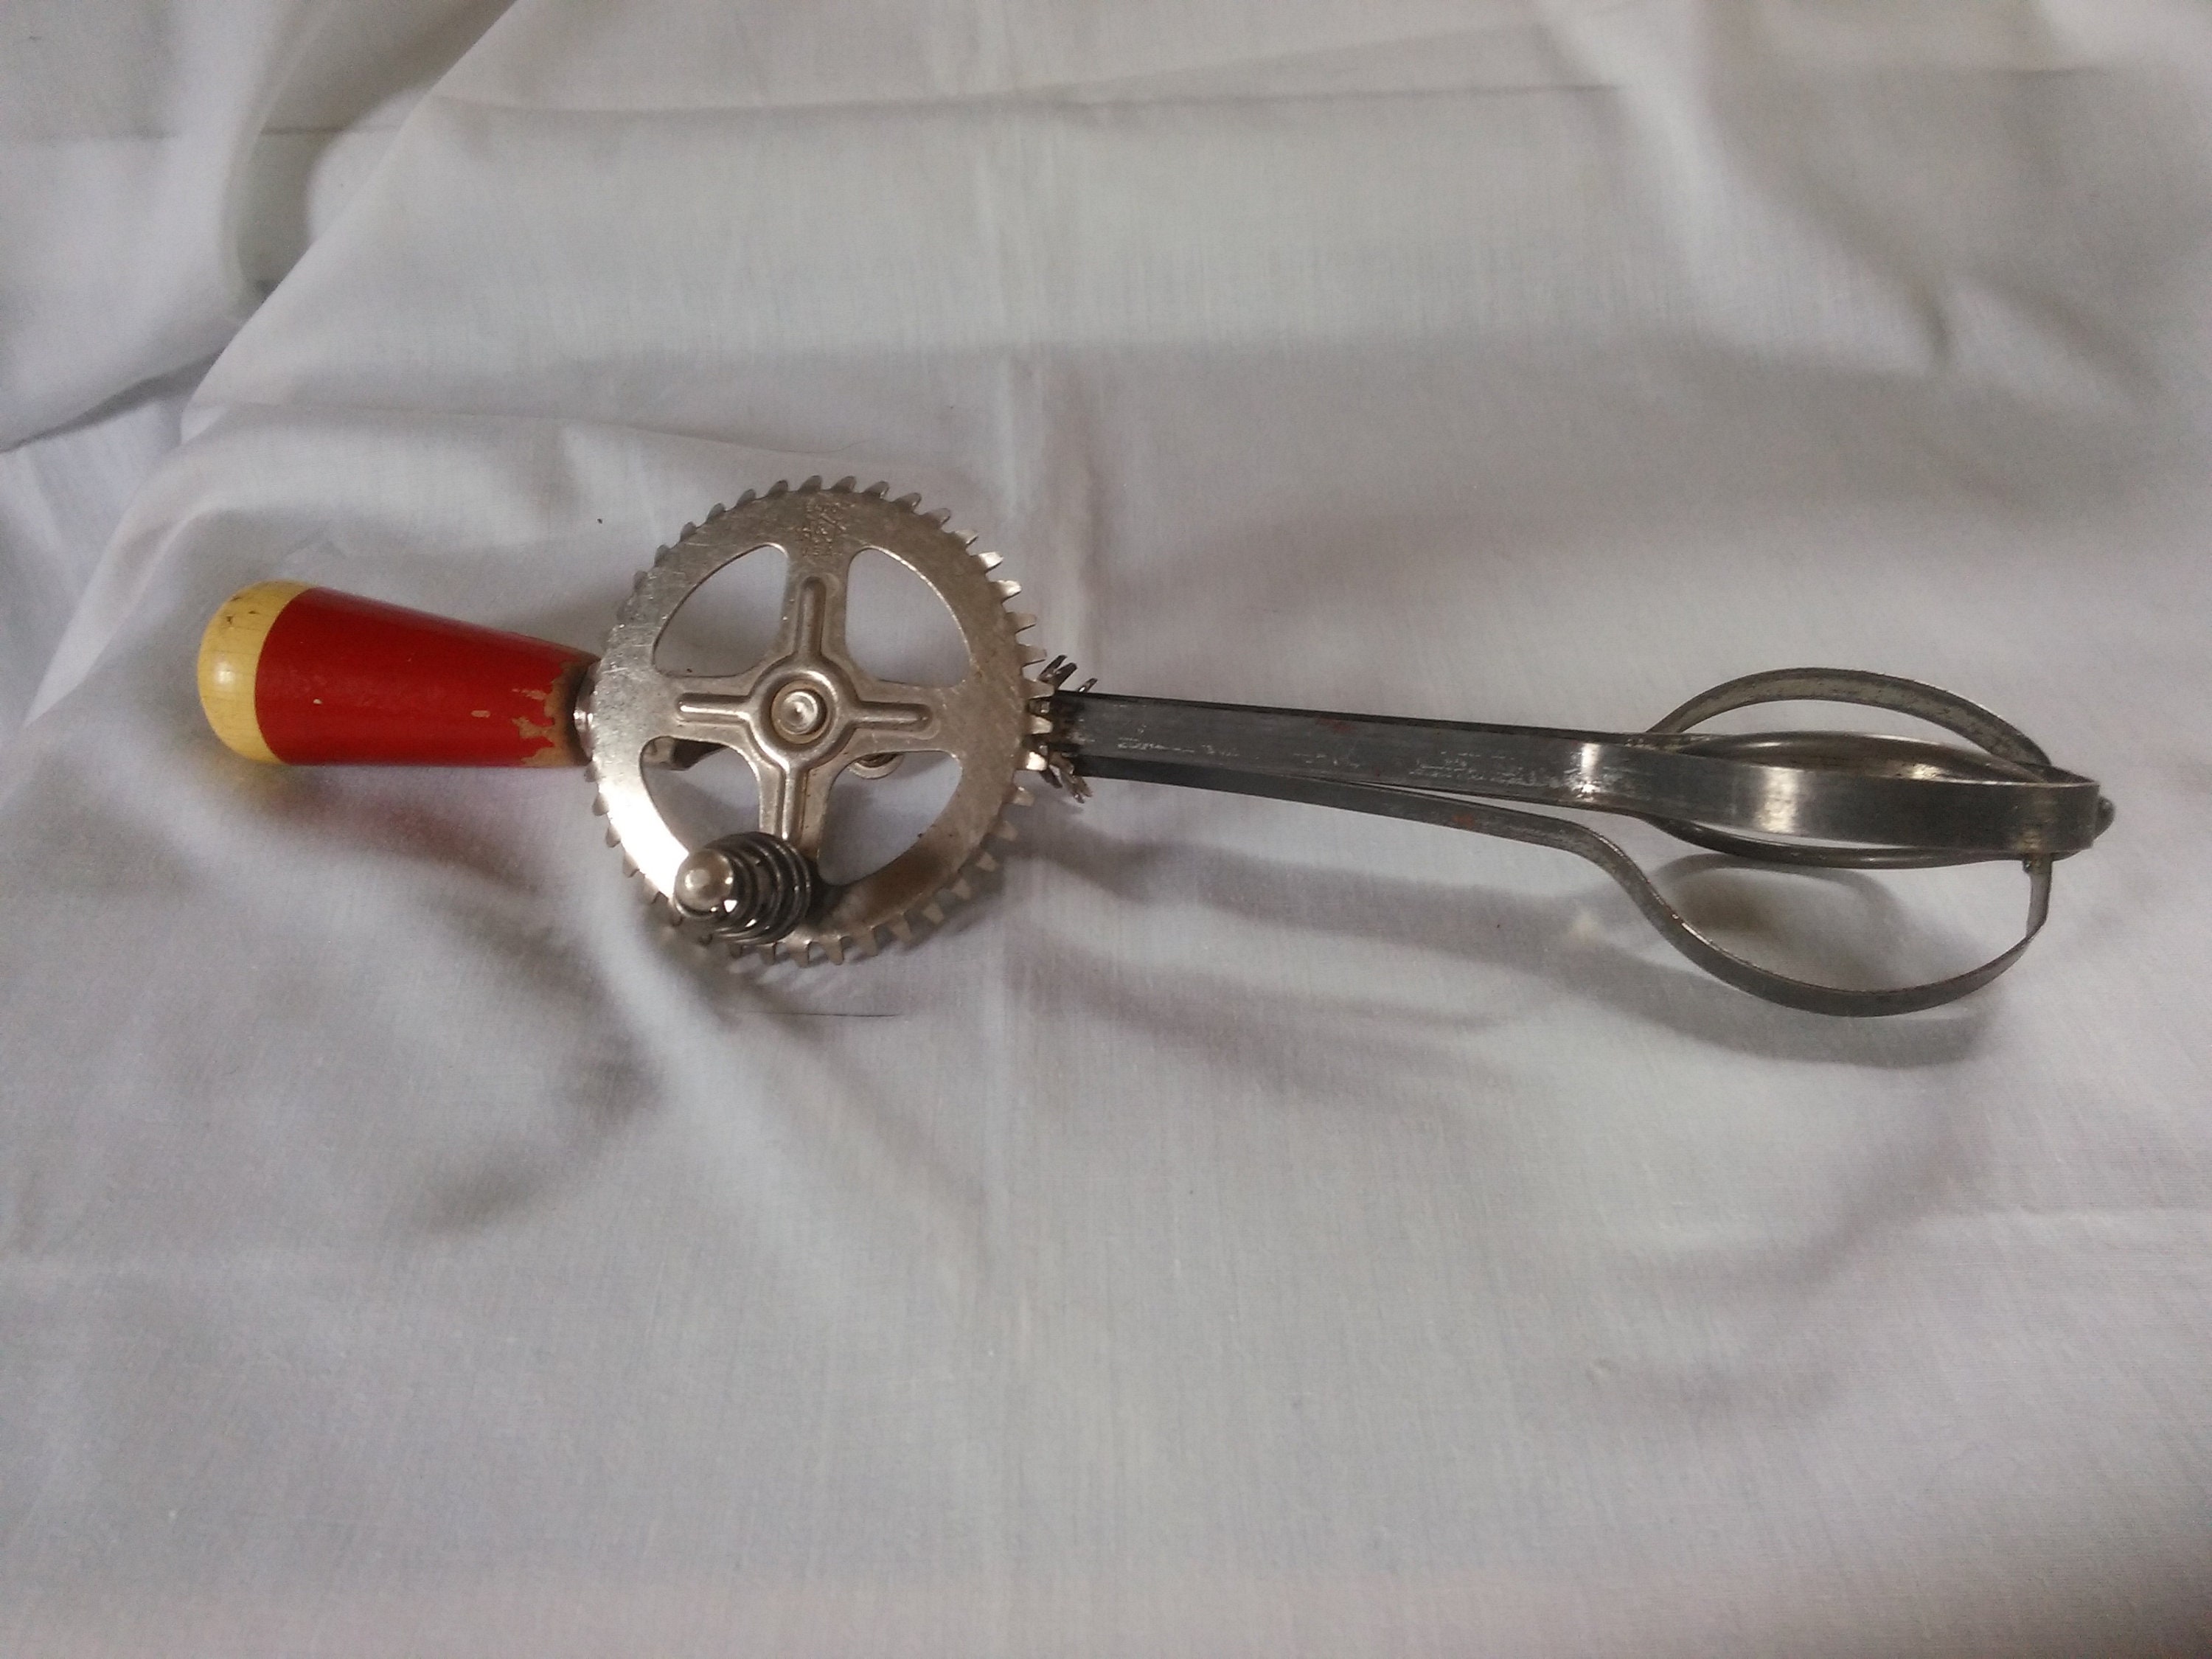 Vintage Androck Egg Beater Manual Hand Mixer Red Wooden Handles Stainless  Steel 